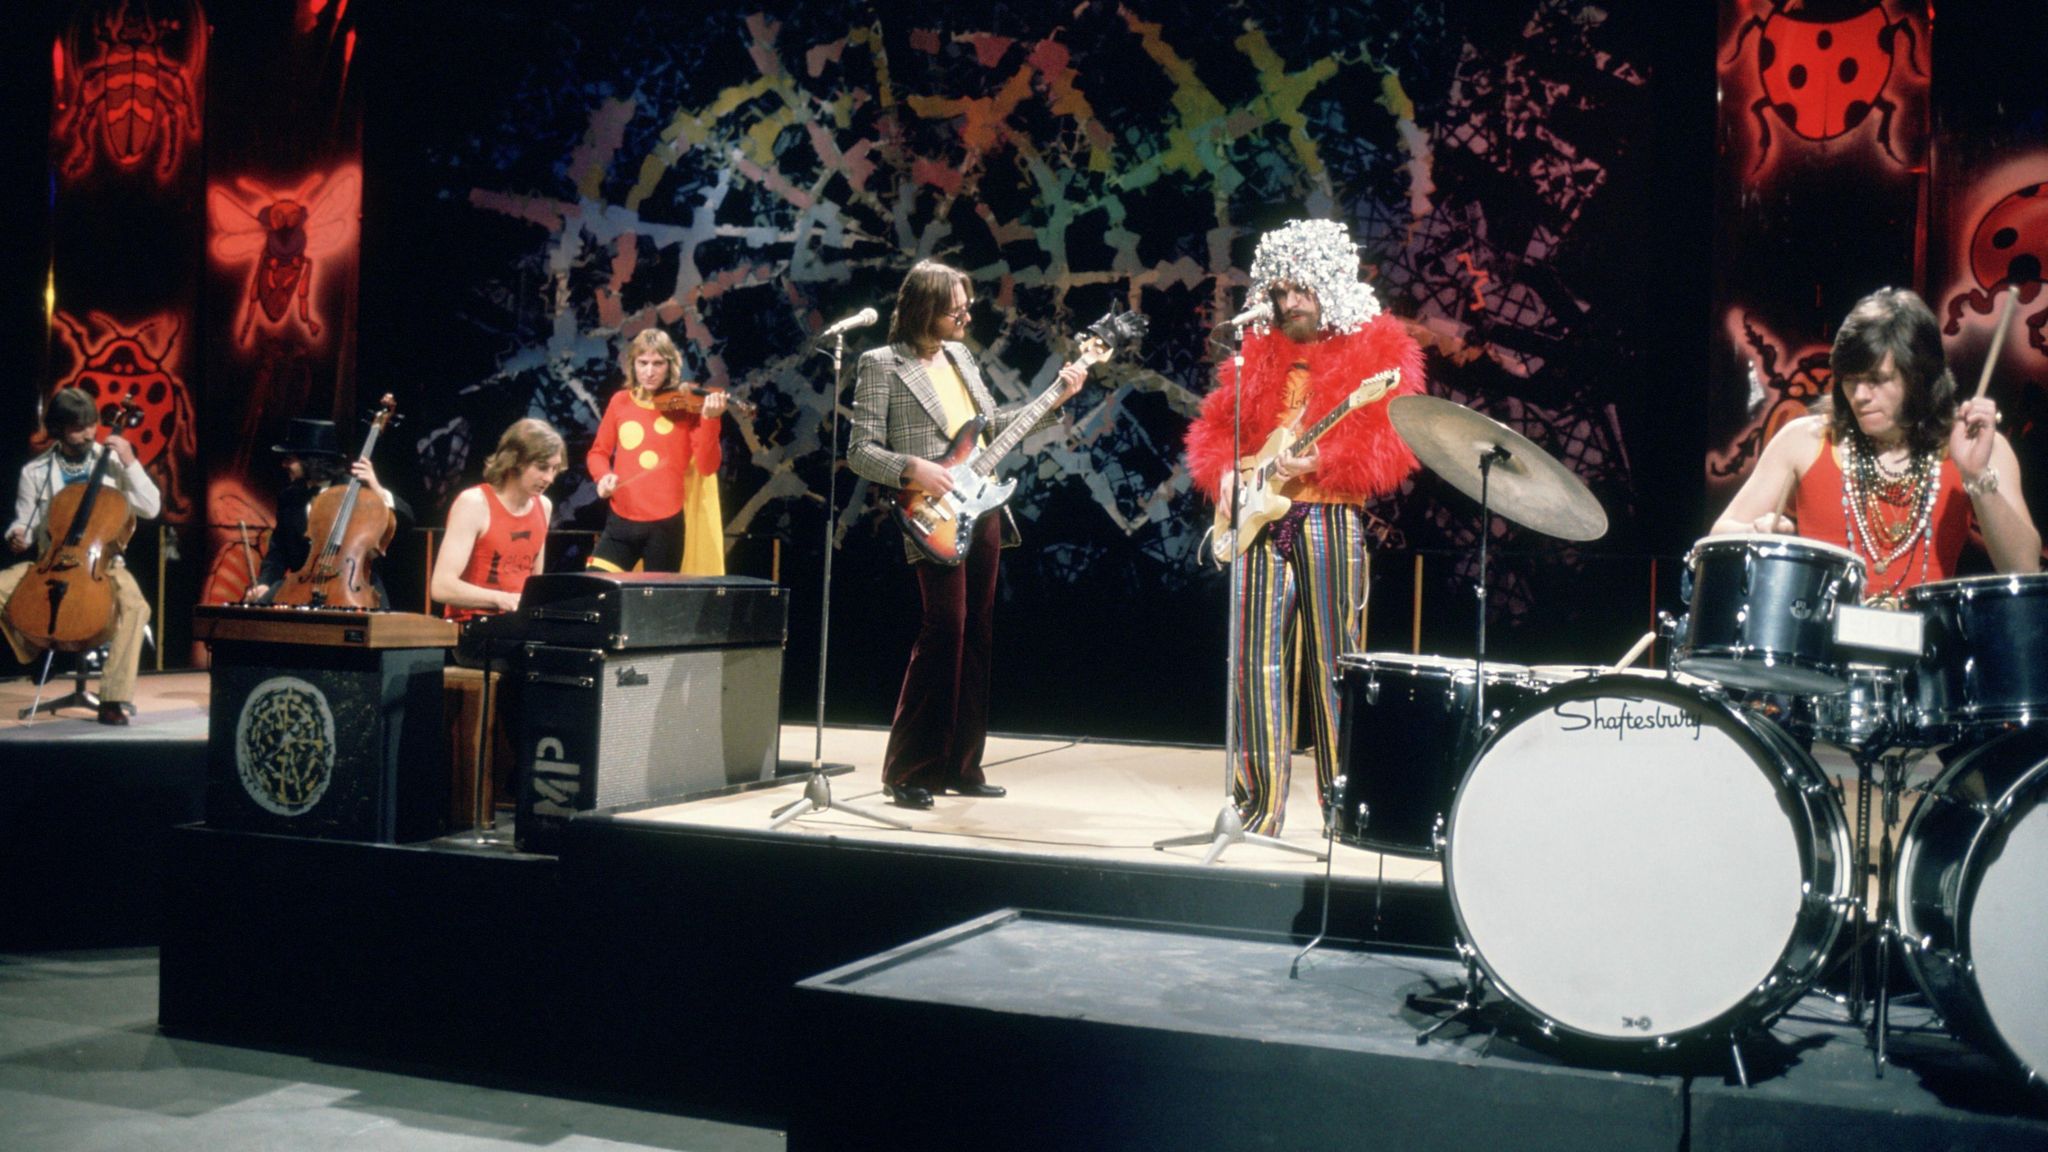 ELO performing at Top of the Pops in 1973